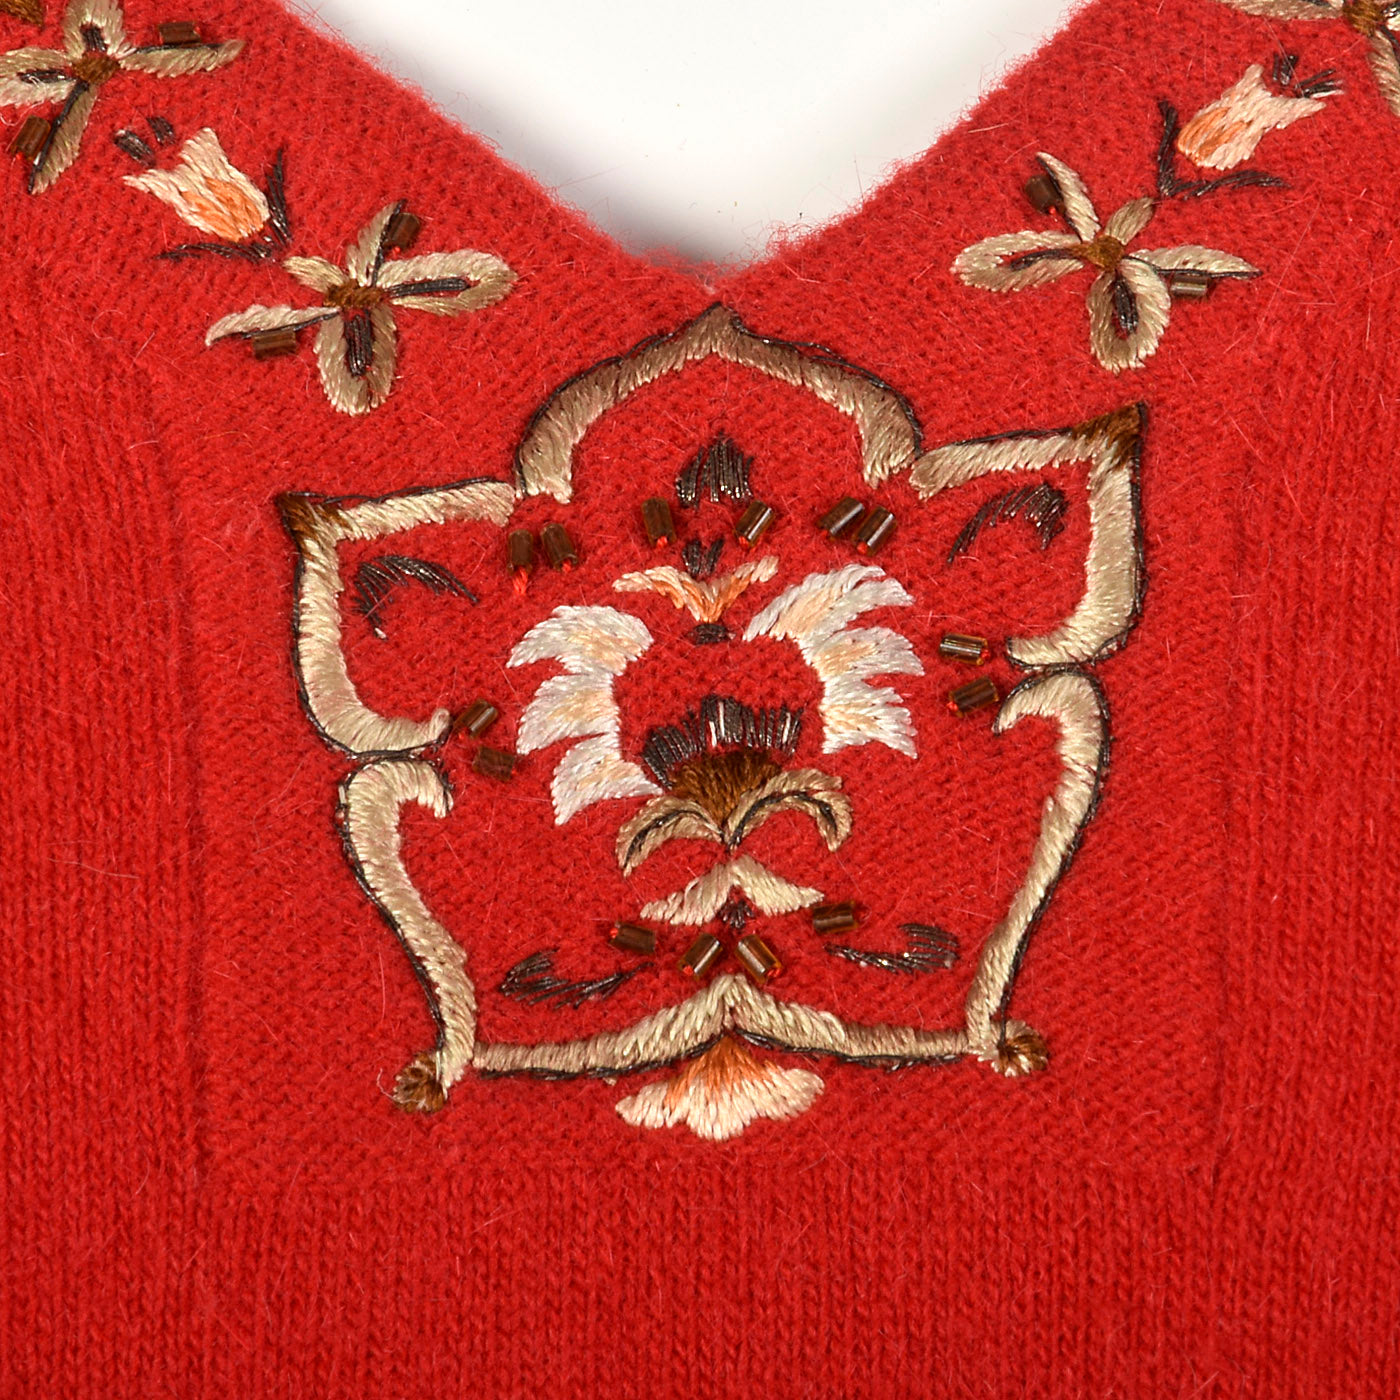 1950s Red Sweater with Metal Thread Trim